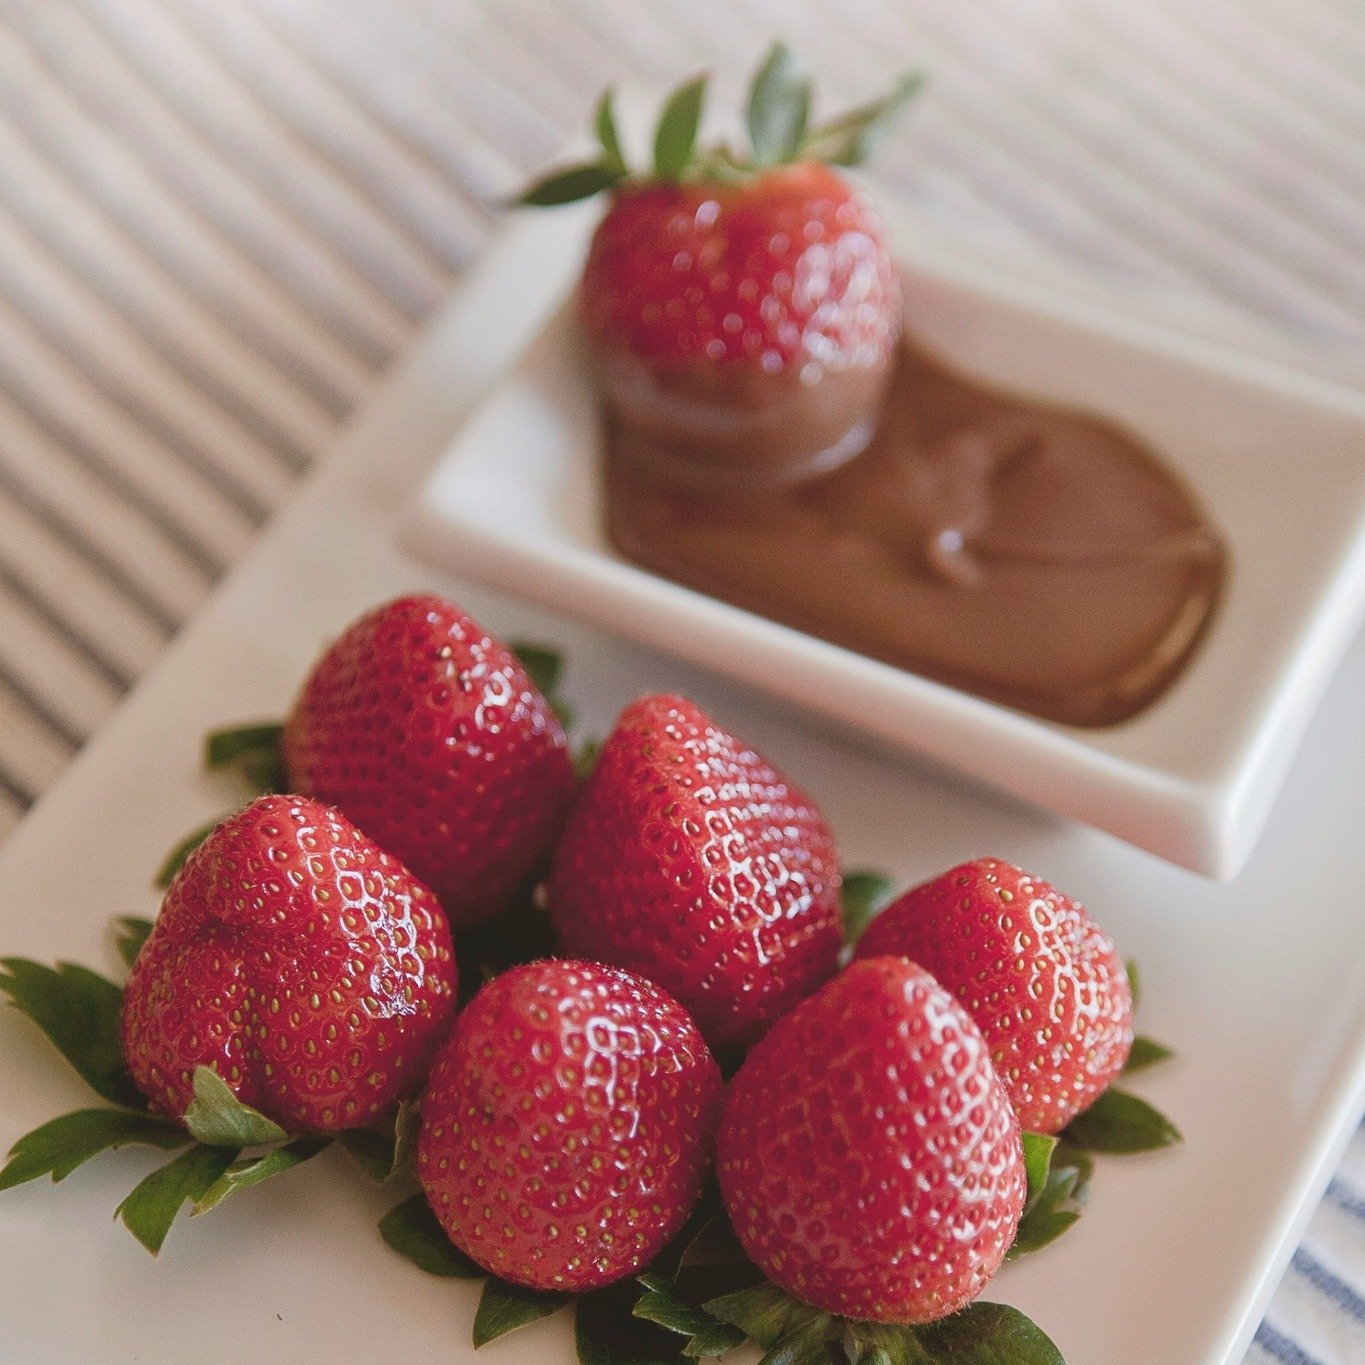 🍓🍫 Join in for a delightful Mother's Day Fundraiser at the market there will be personally hand-dipping market-fresh strawberries in decadent chocolate on May 11th at 8:00AM. Show your support for our local market while treating Mom to the sweetest